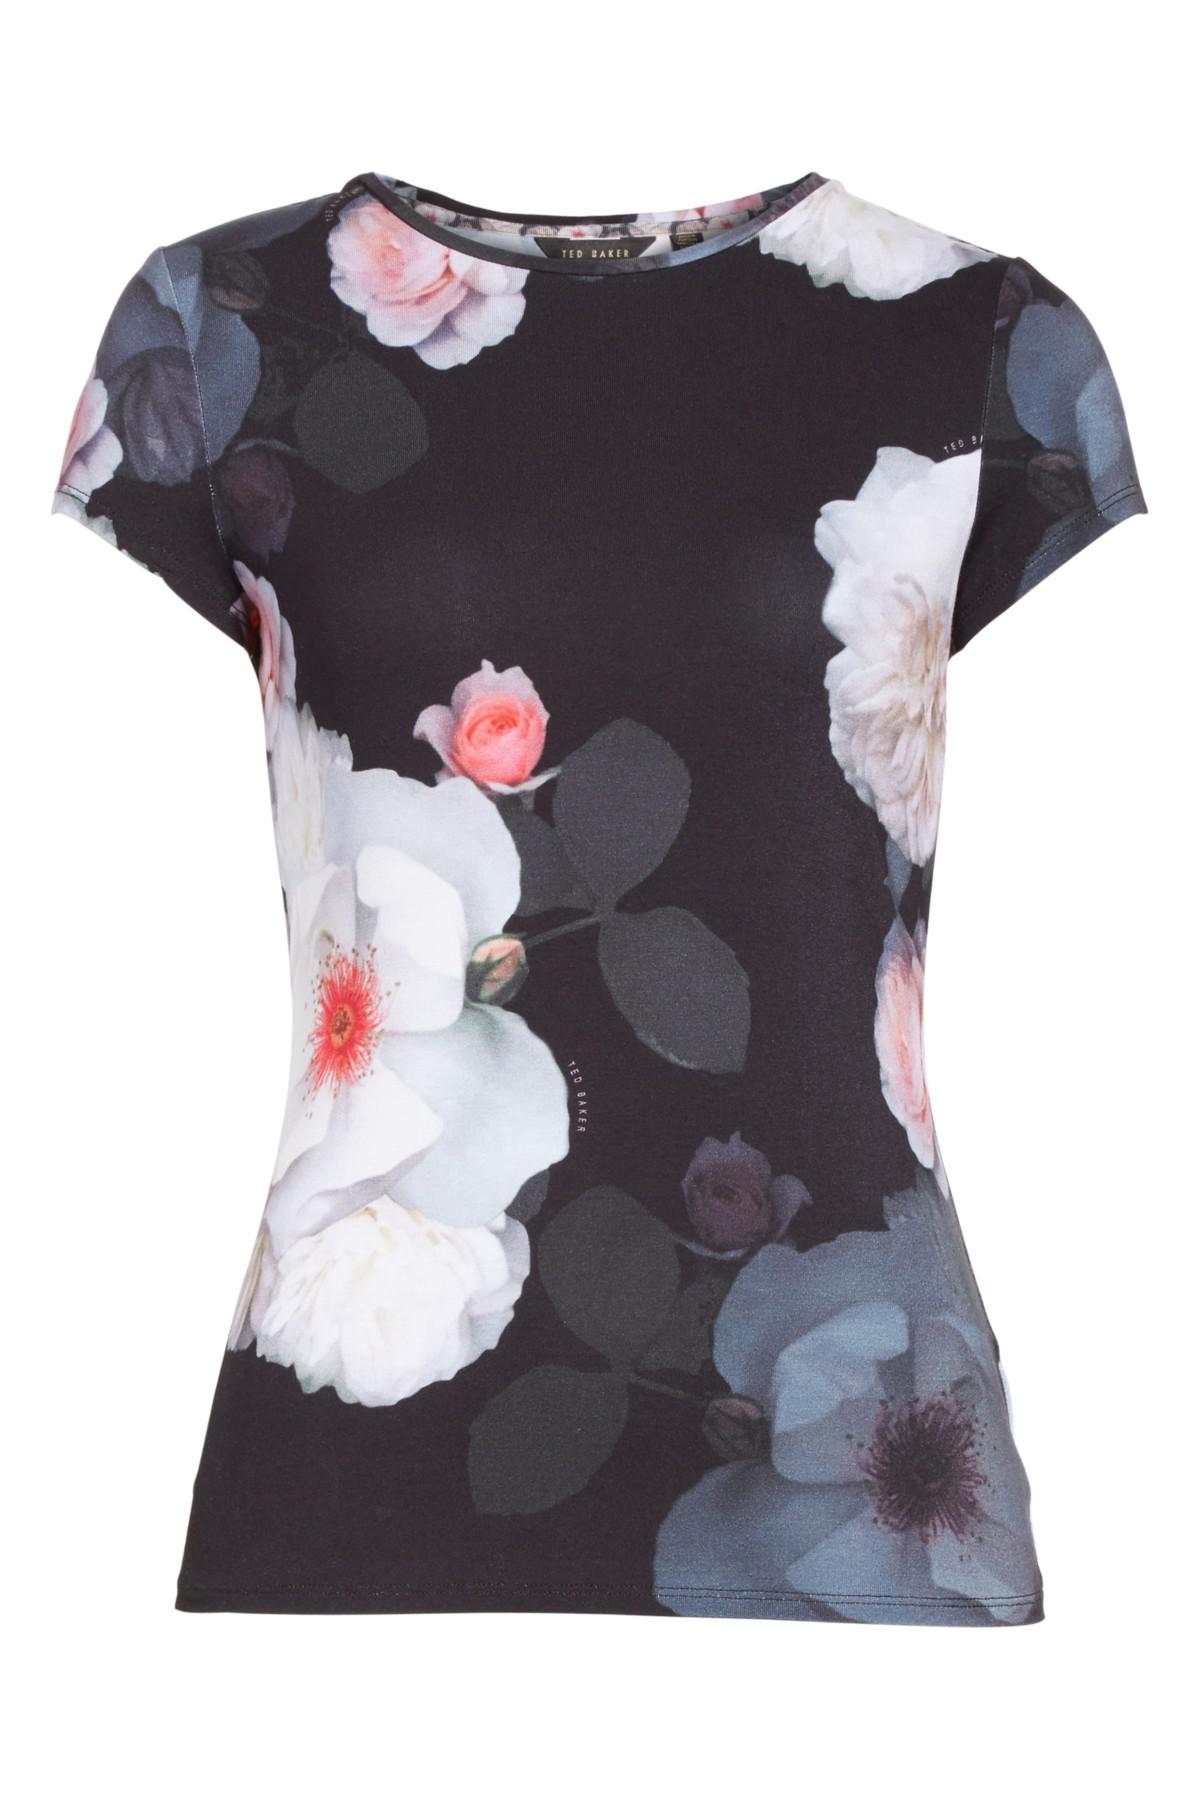 Lyst - Ted Baker Tamraa Floral Fitted Tee in Black